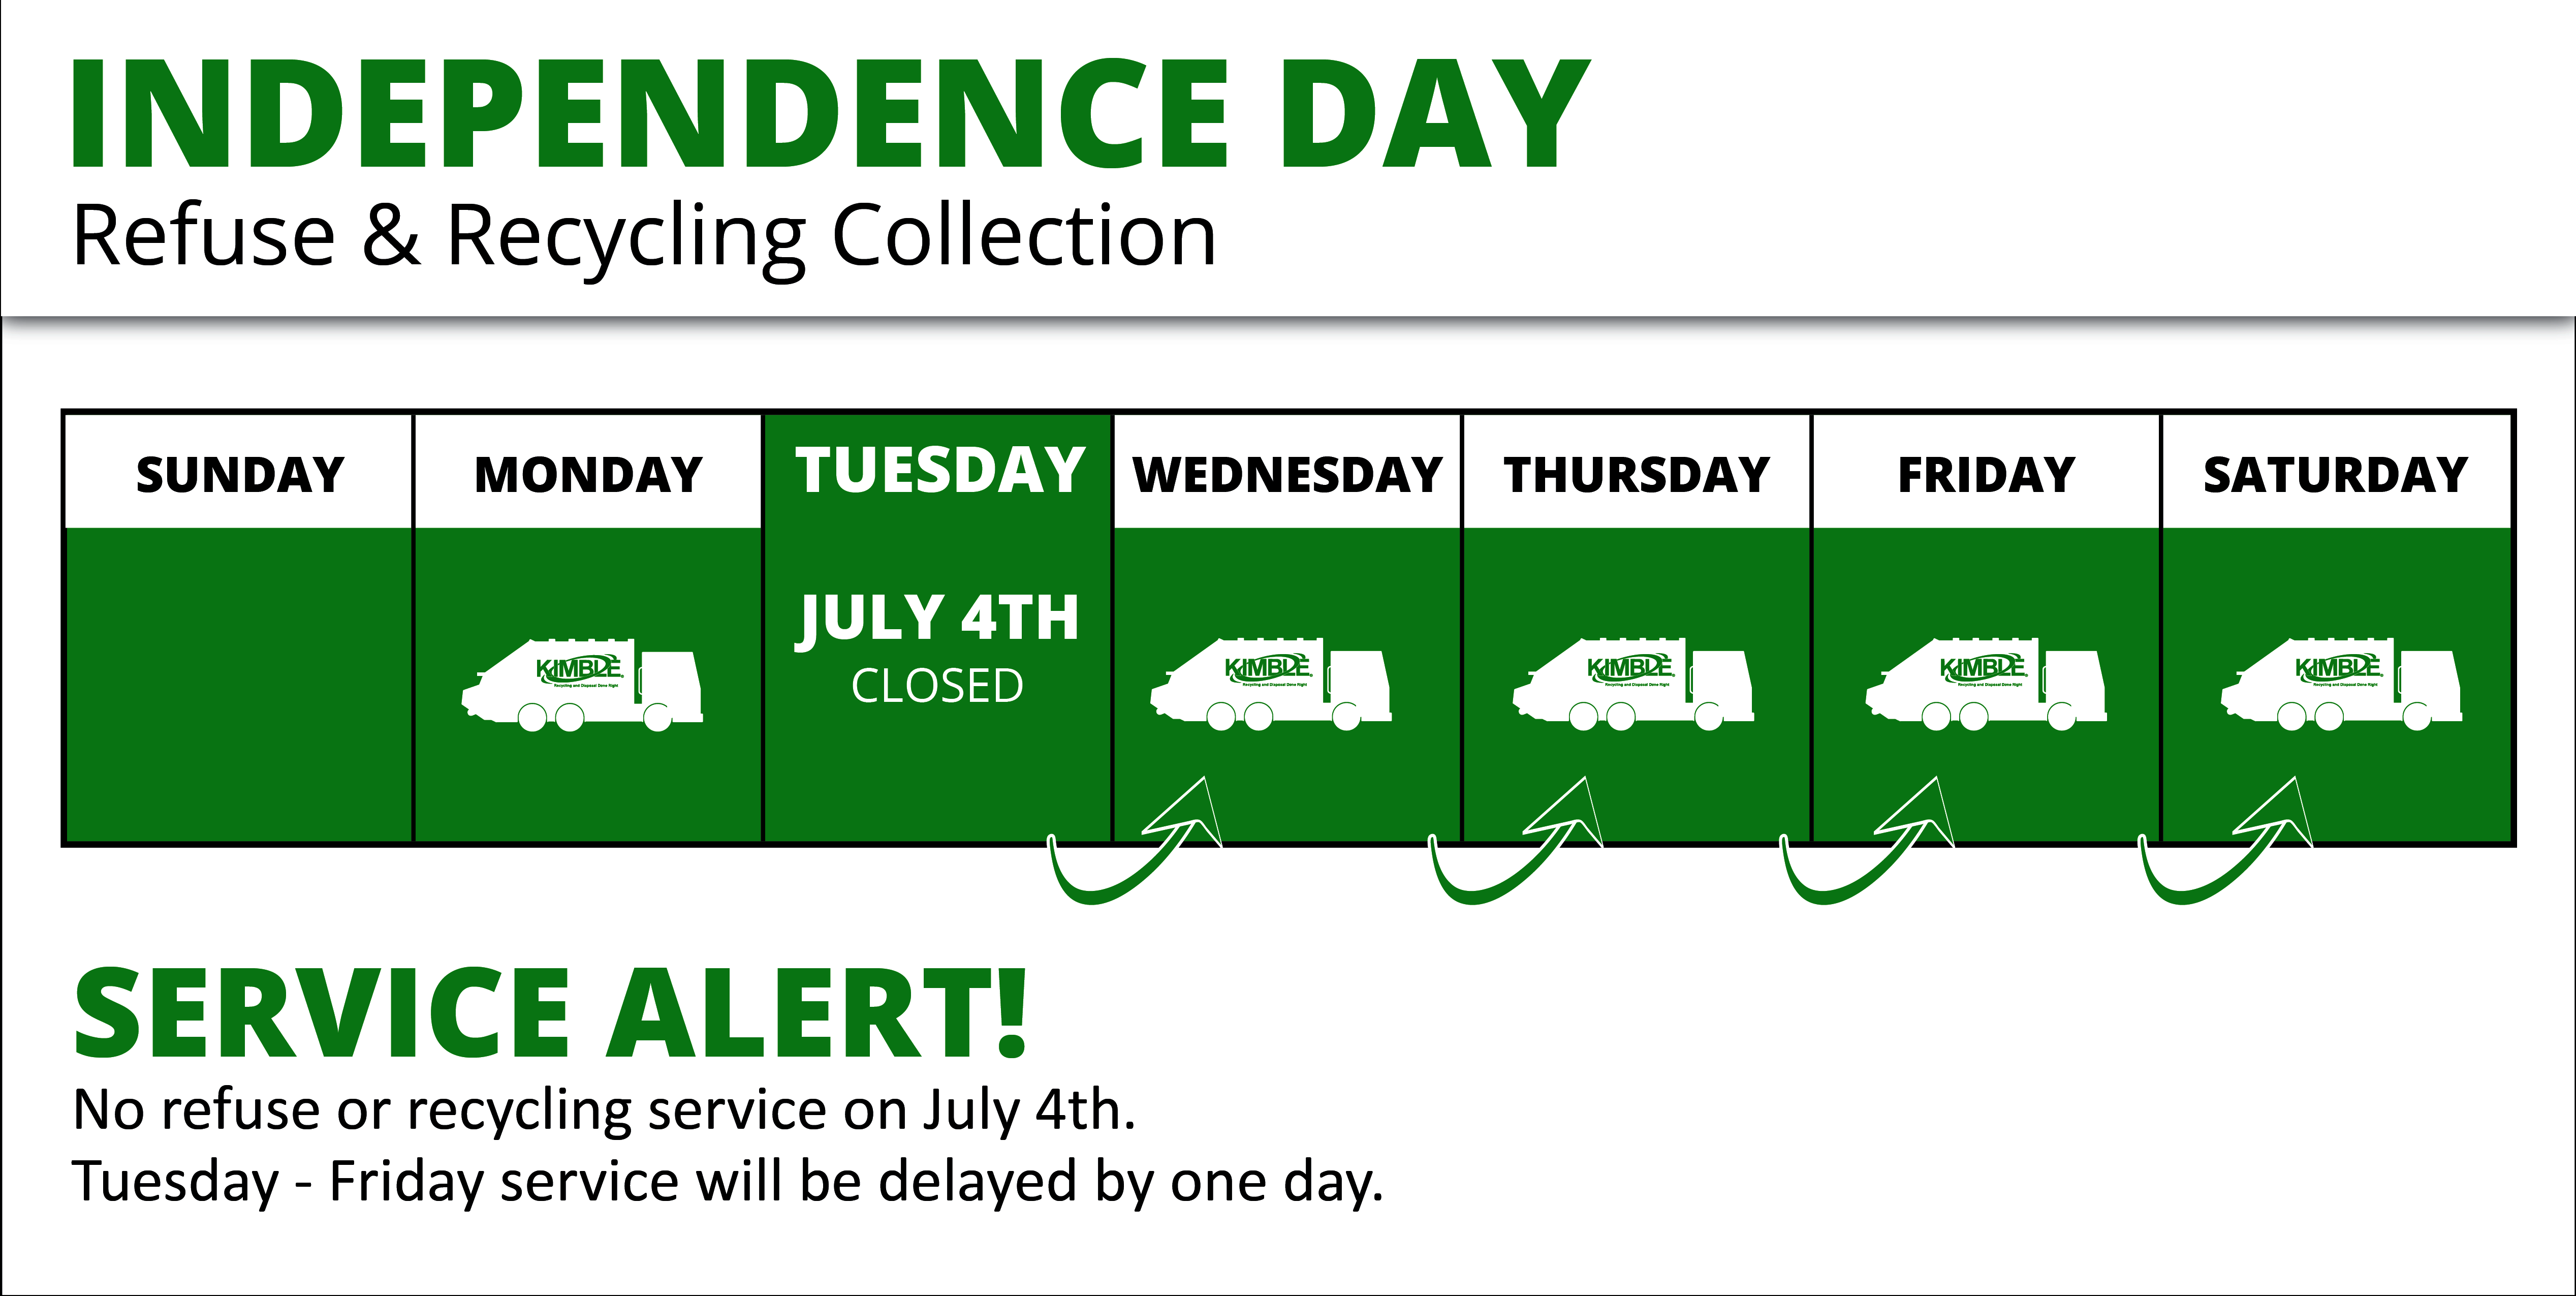 Independence Day Refuse and Recycling schedule example